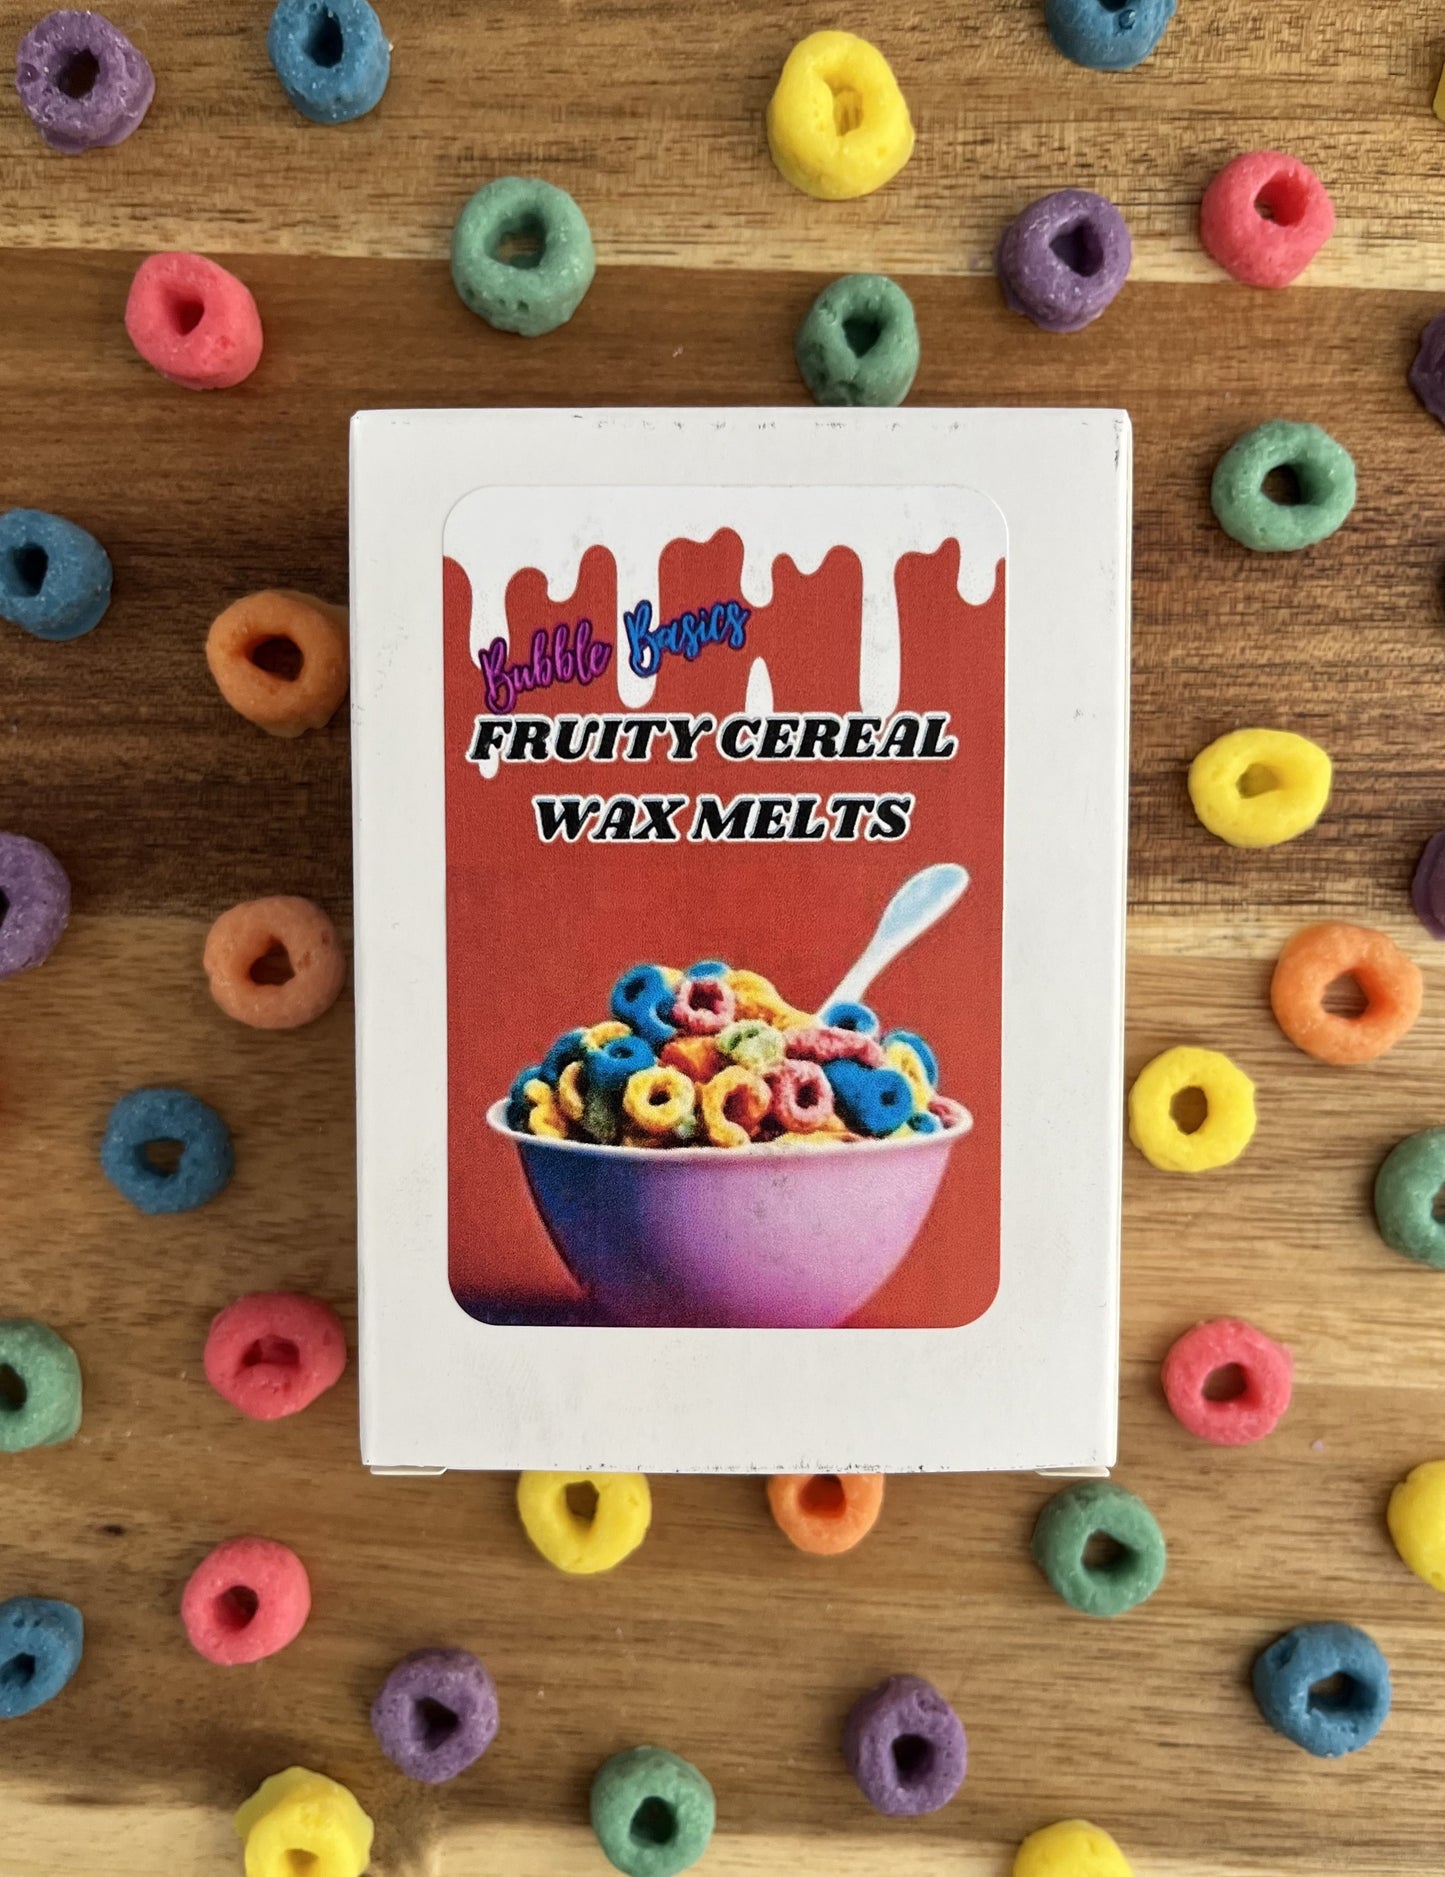 Fruity Cereal Wax Melts front